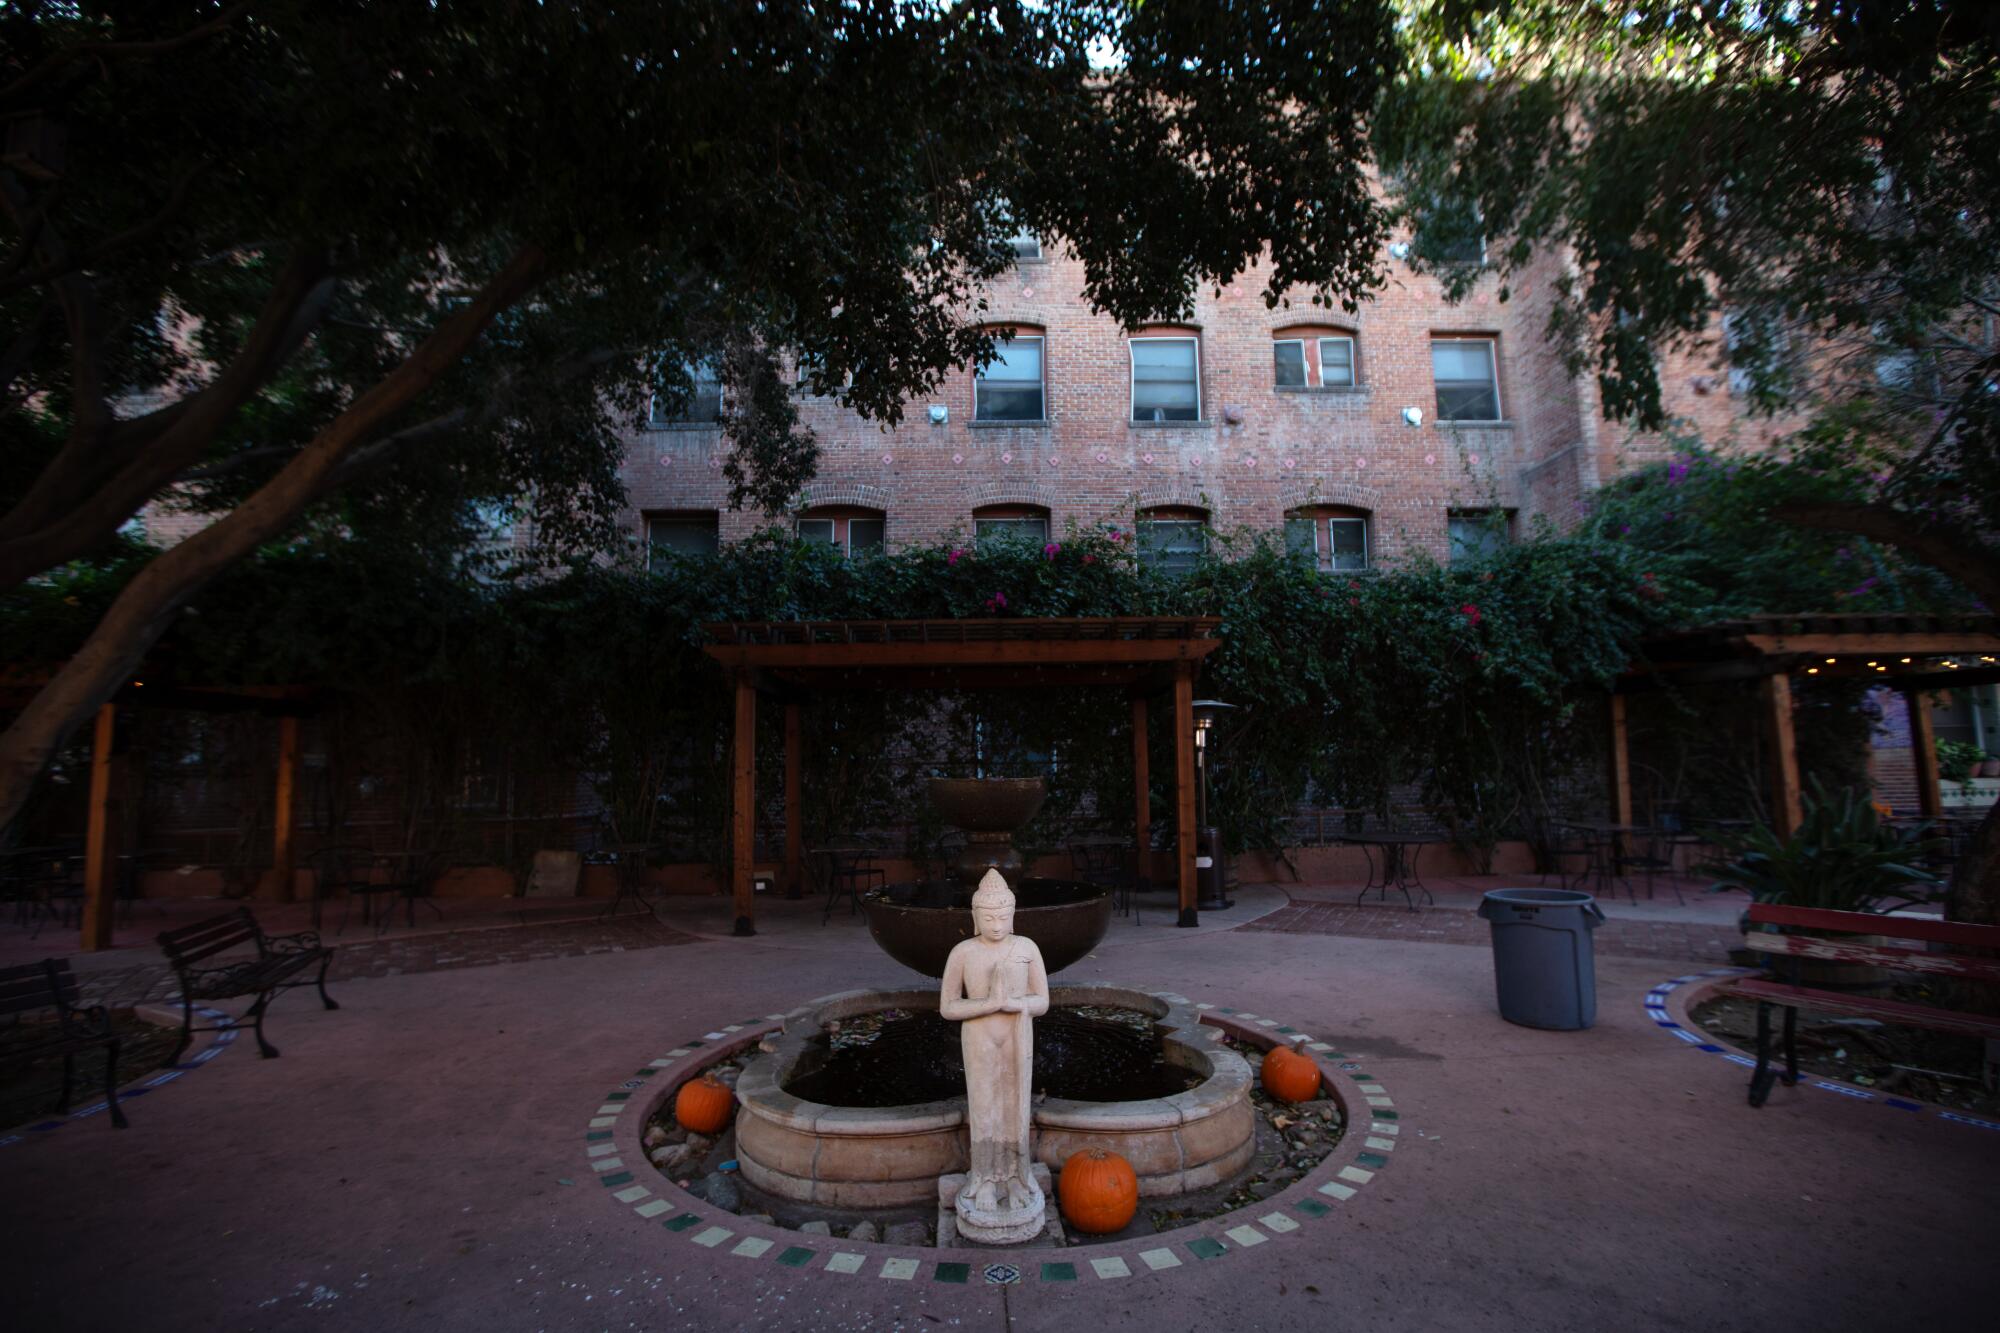 A small statue of a figure with folded hands stands near a dry fountain in a shaded courtyard.